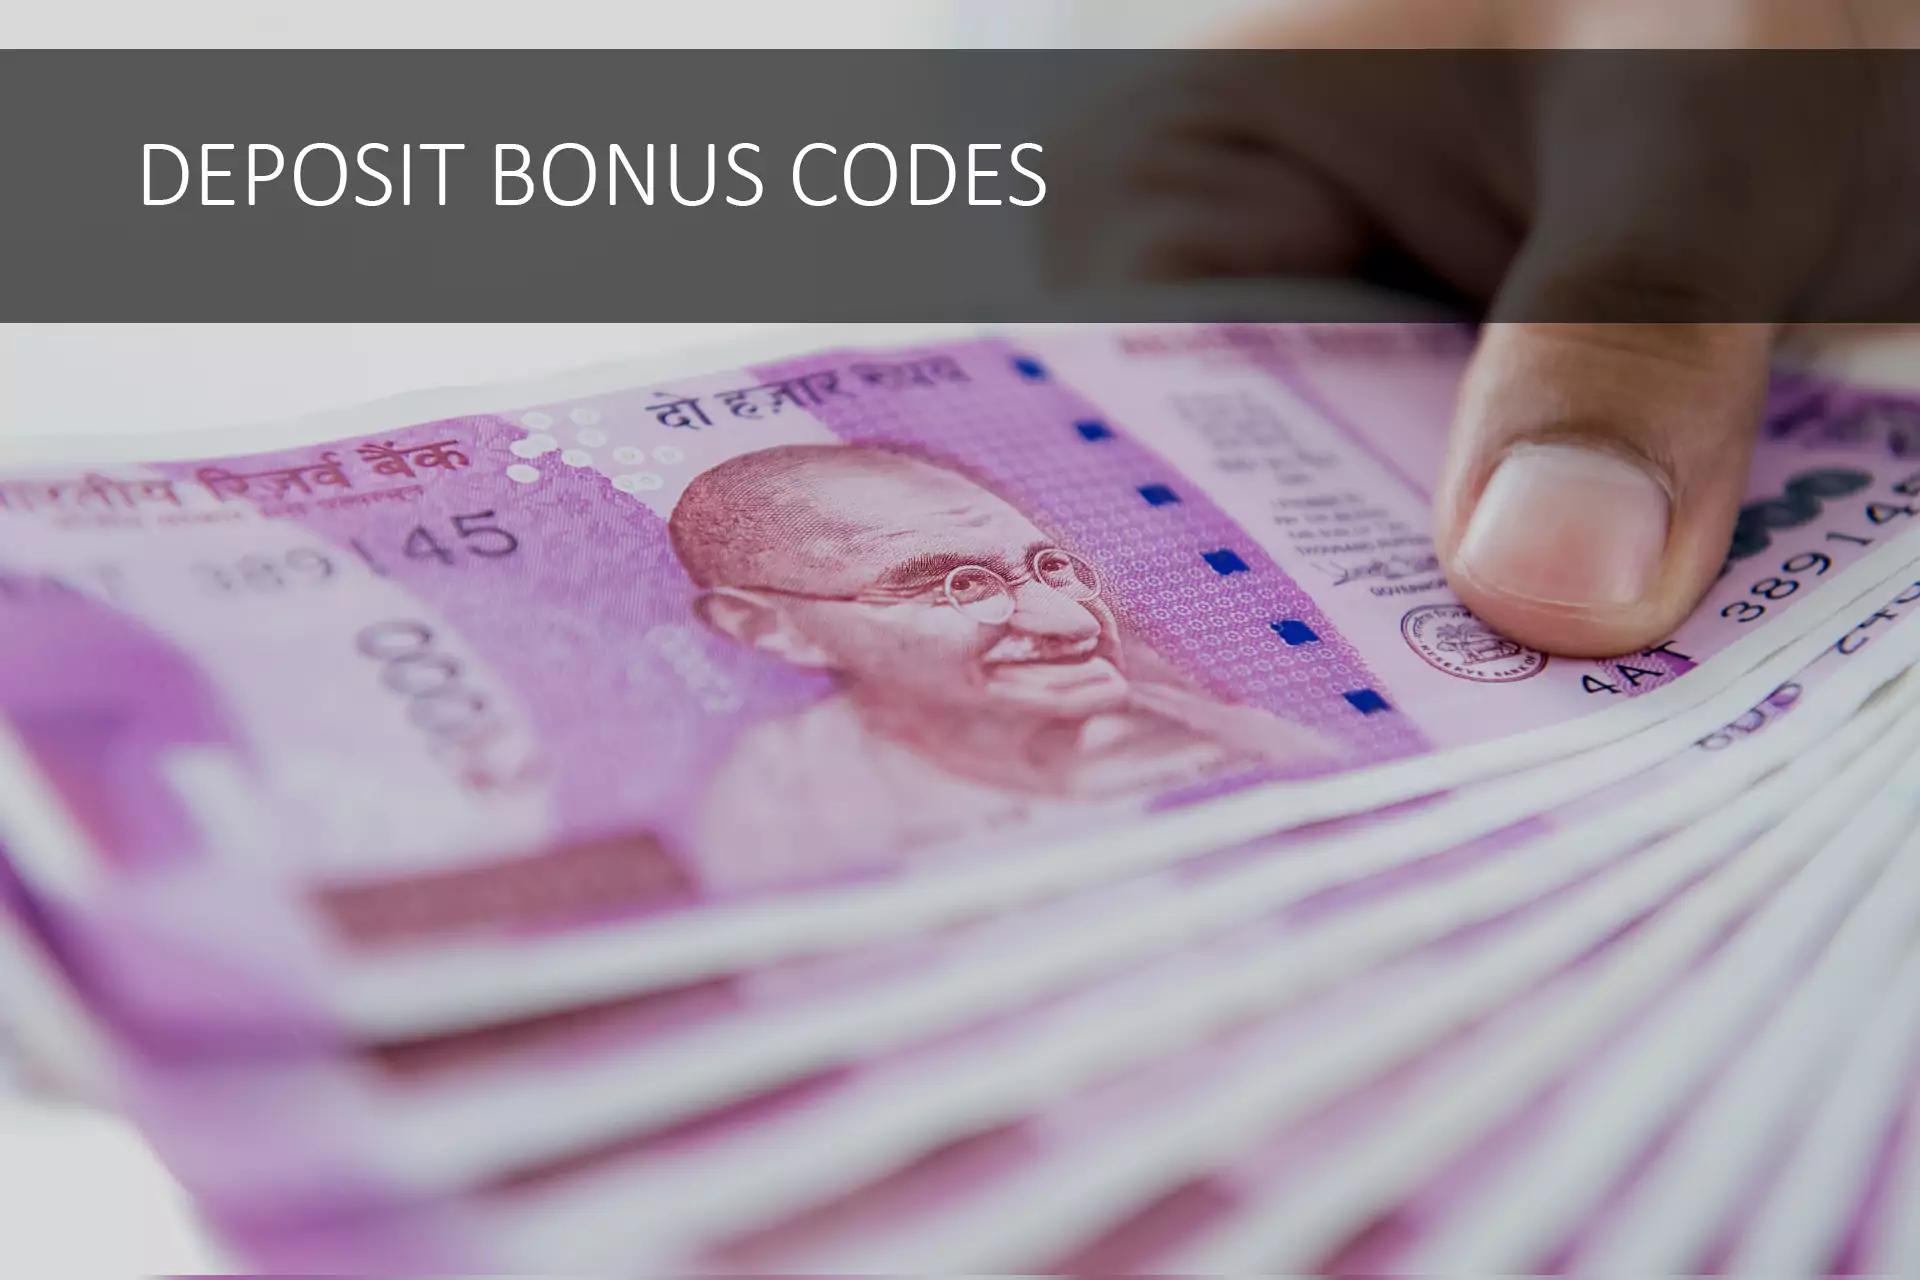 To get a deposit bonus you should top up your betting account.